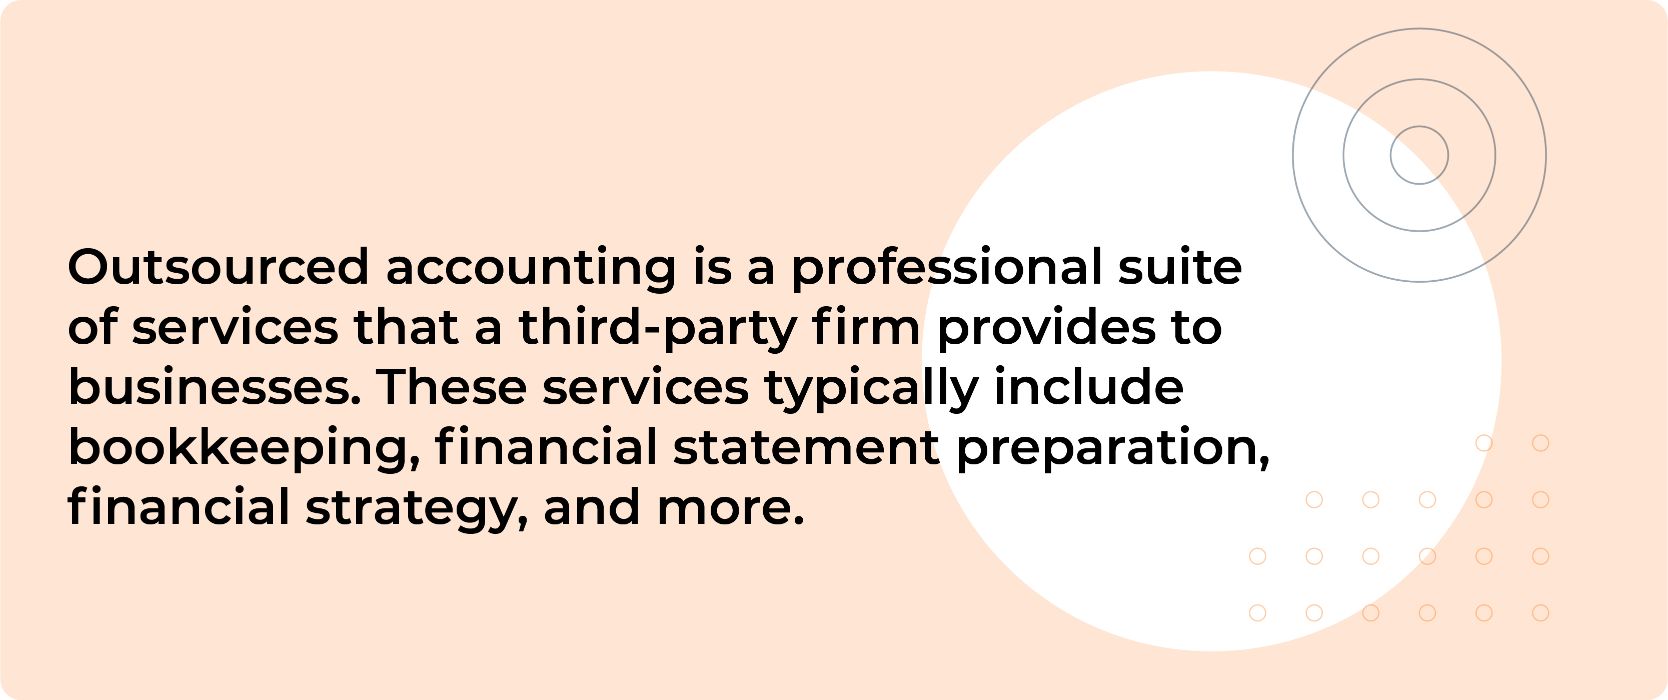 What are outsourced accounting services?